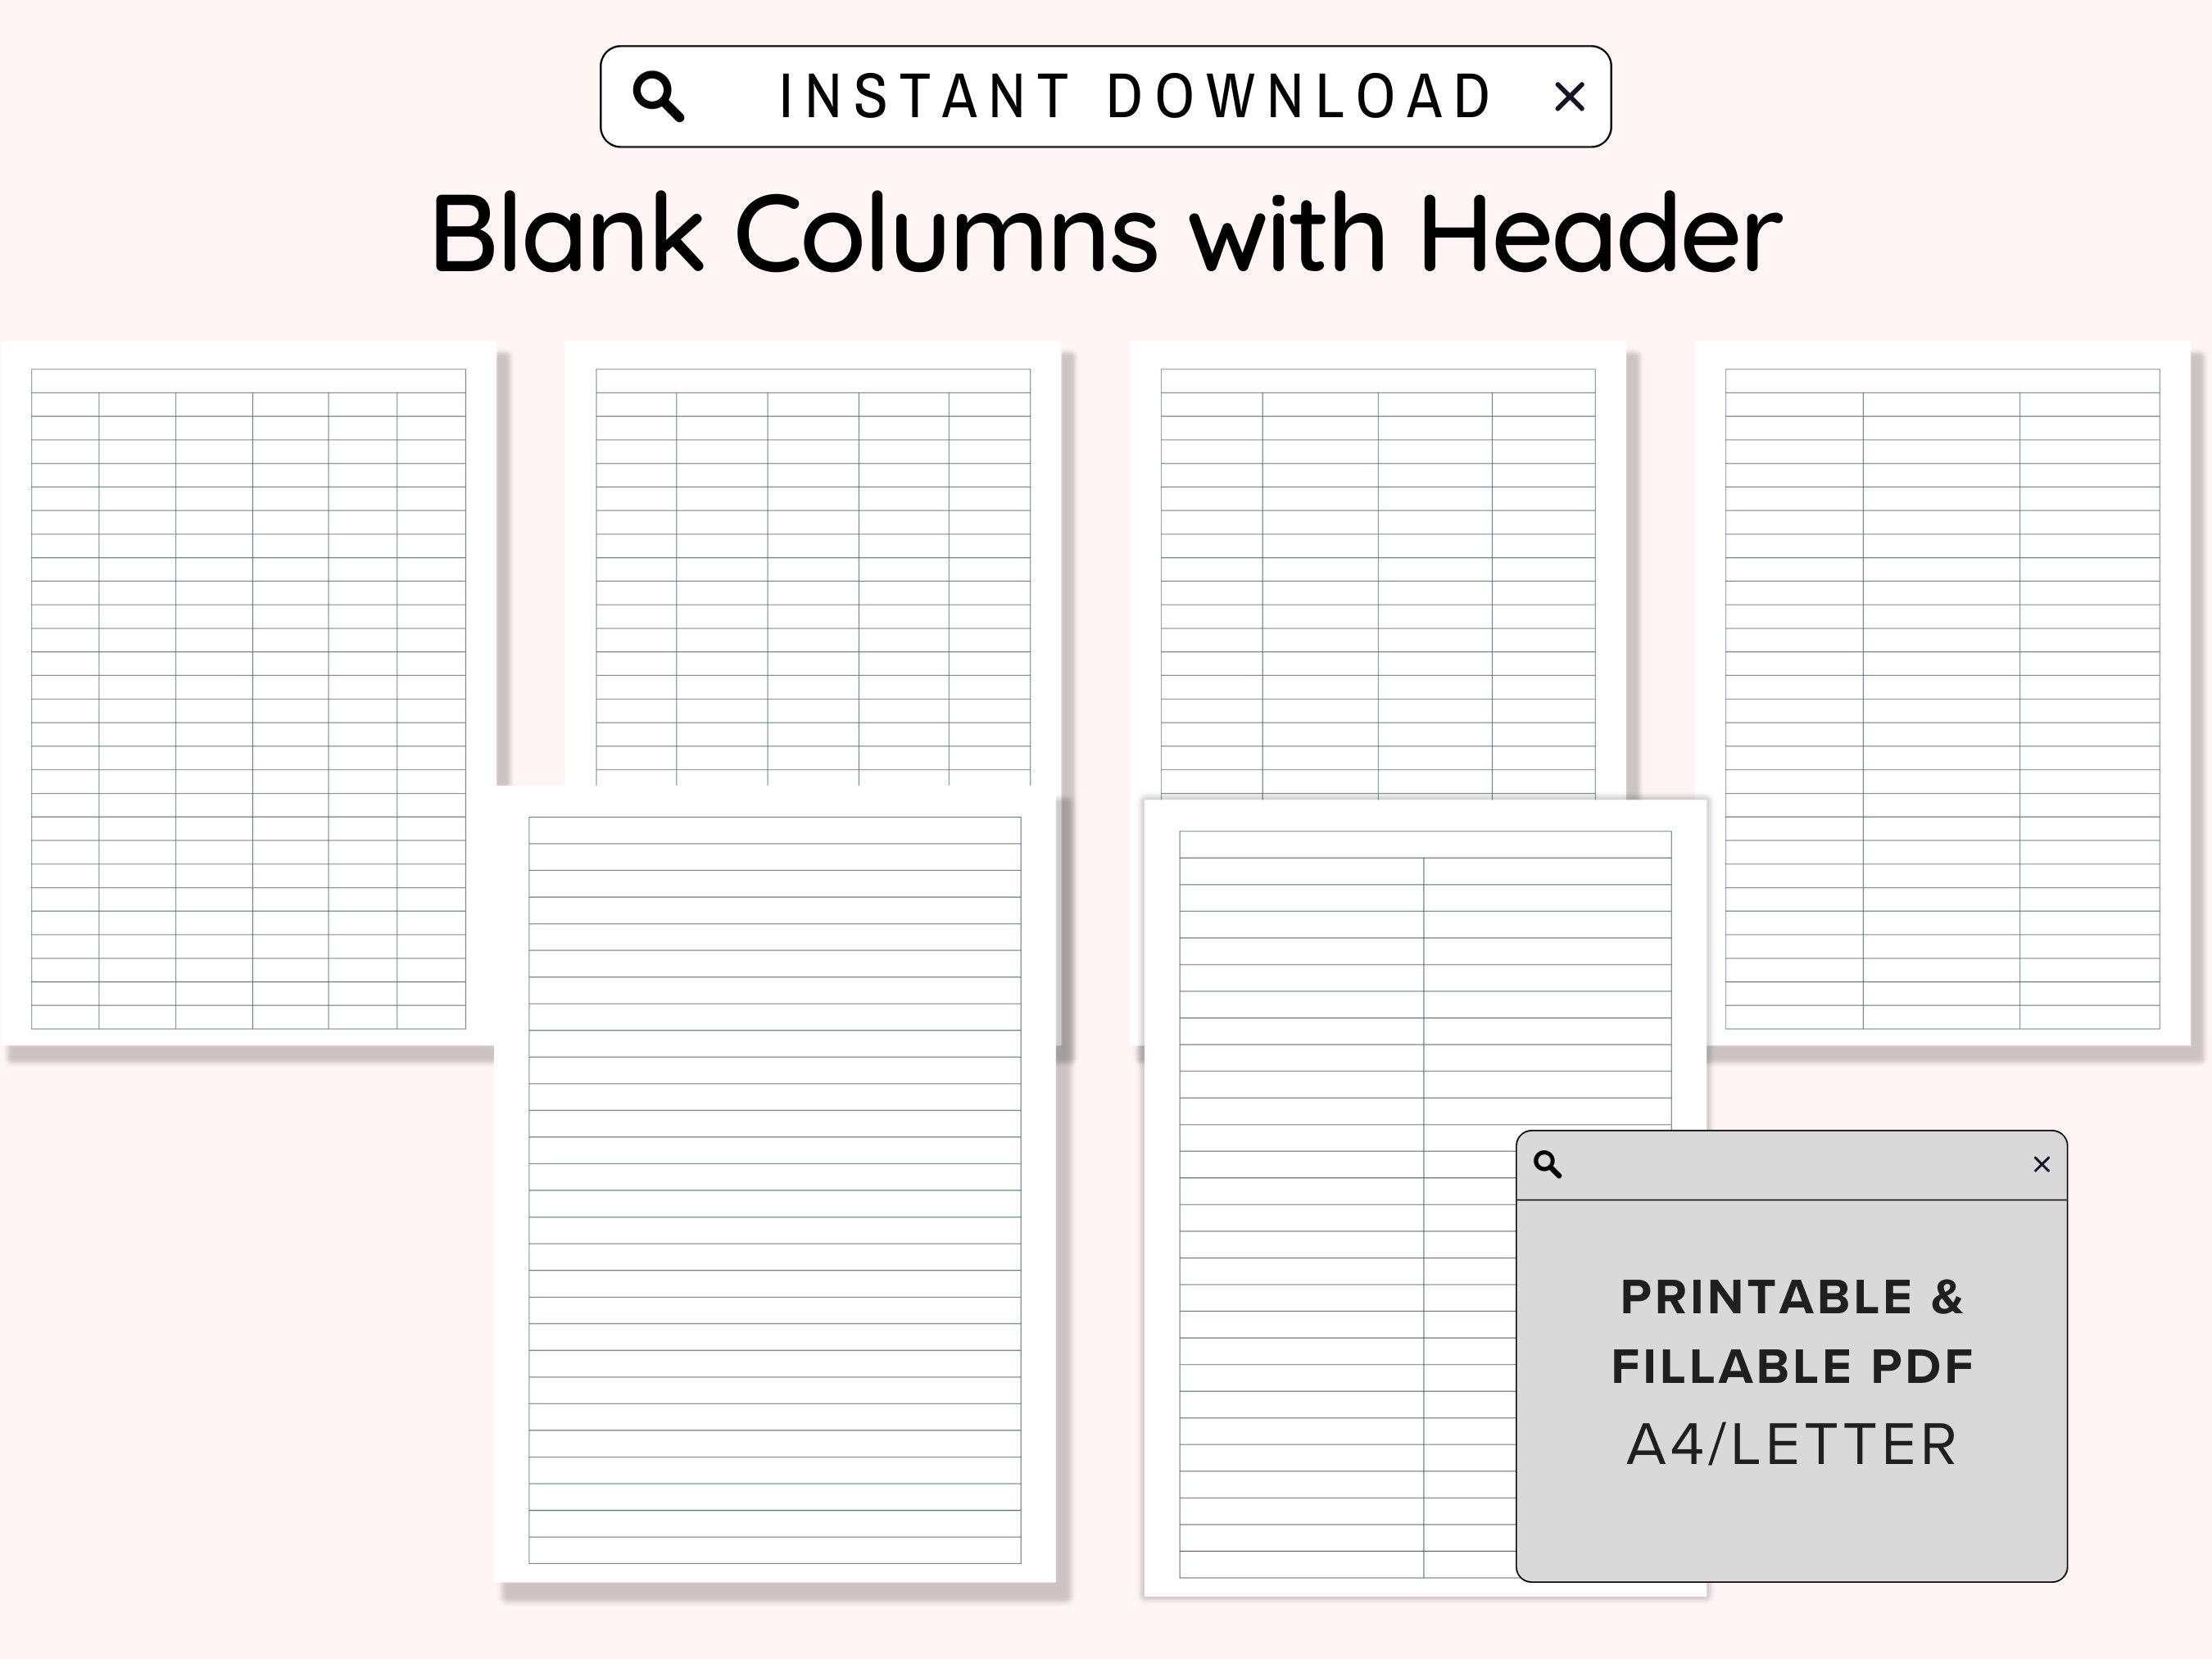 FIELD NOTES Basic Beginner Stencil Quickly Produces Banners, Flags and  Tasks To-do Lists. Available Over Here. 